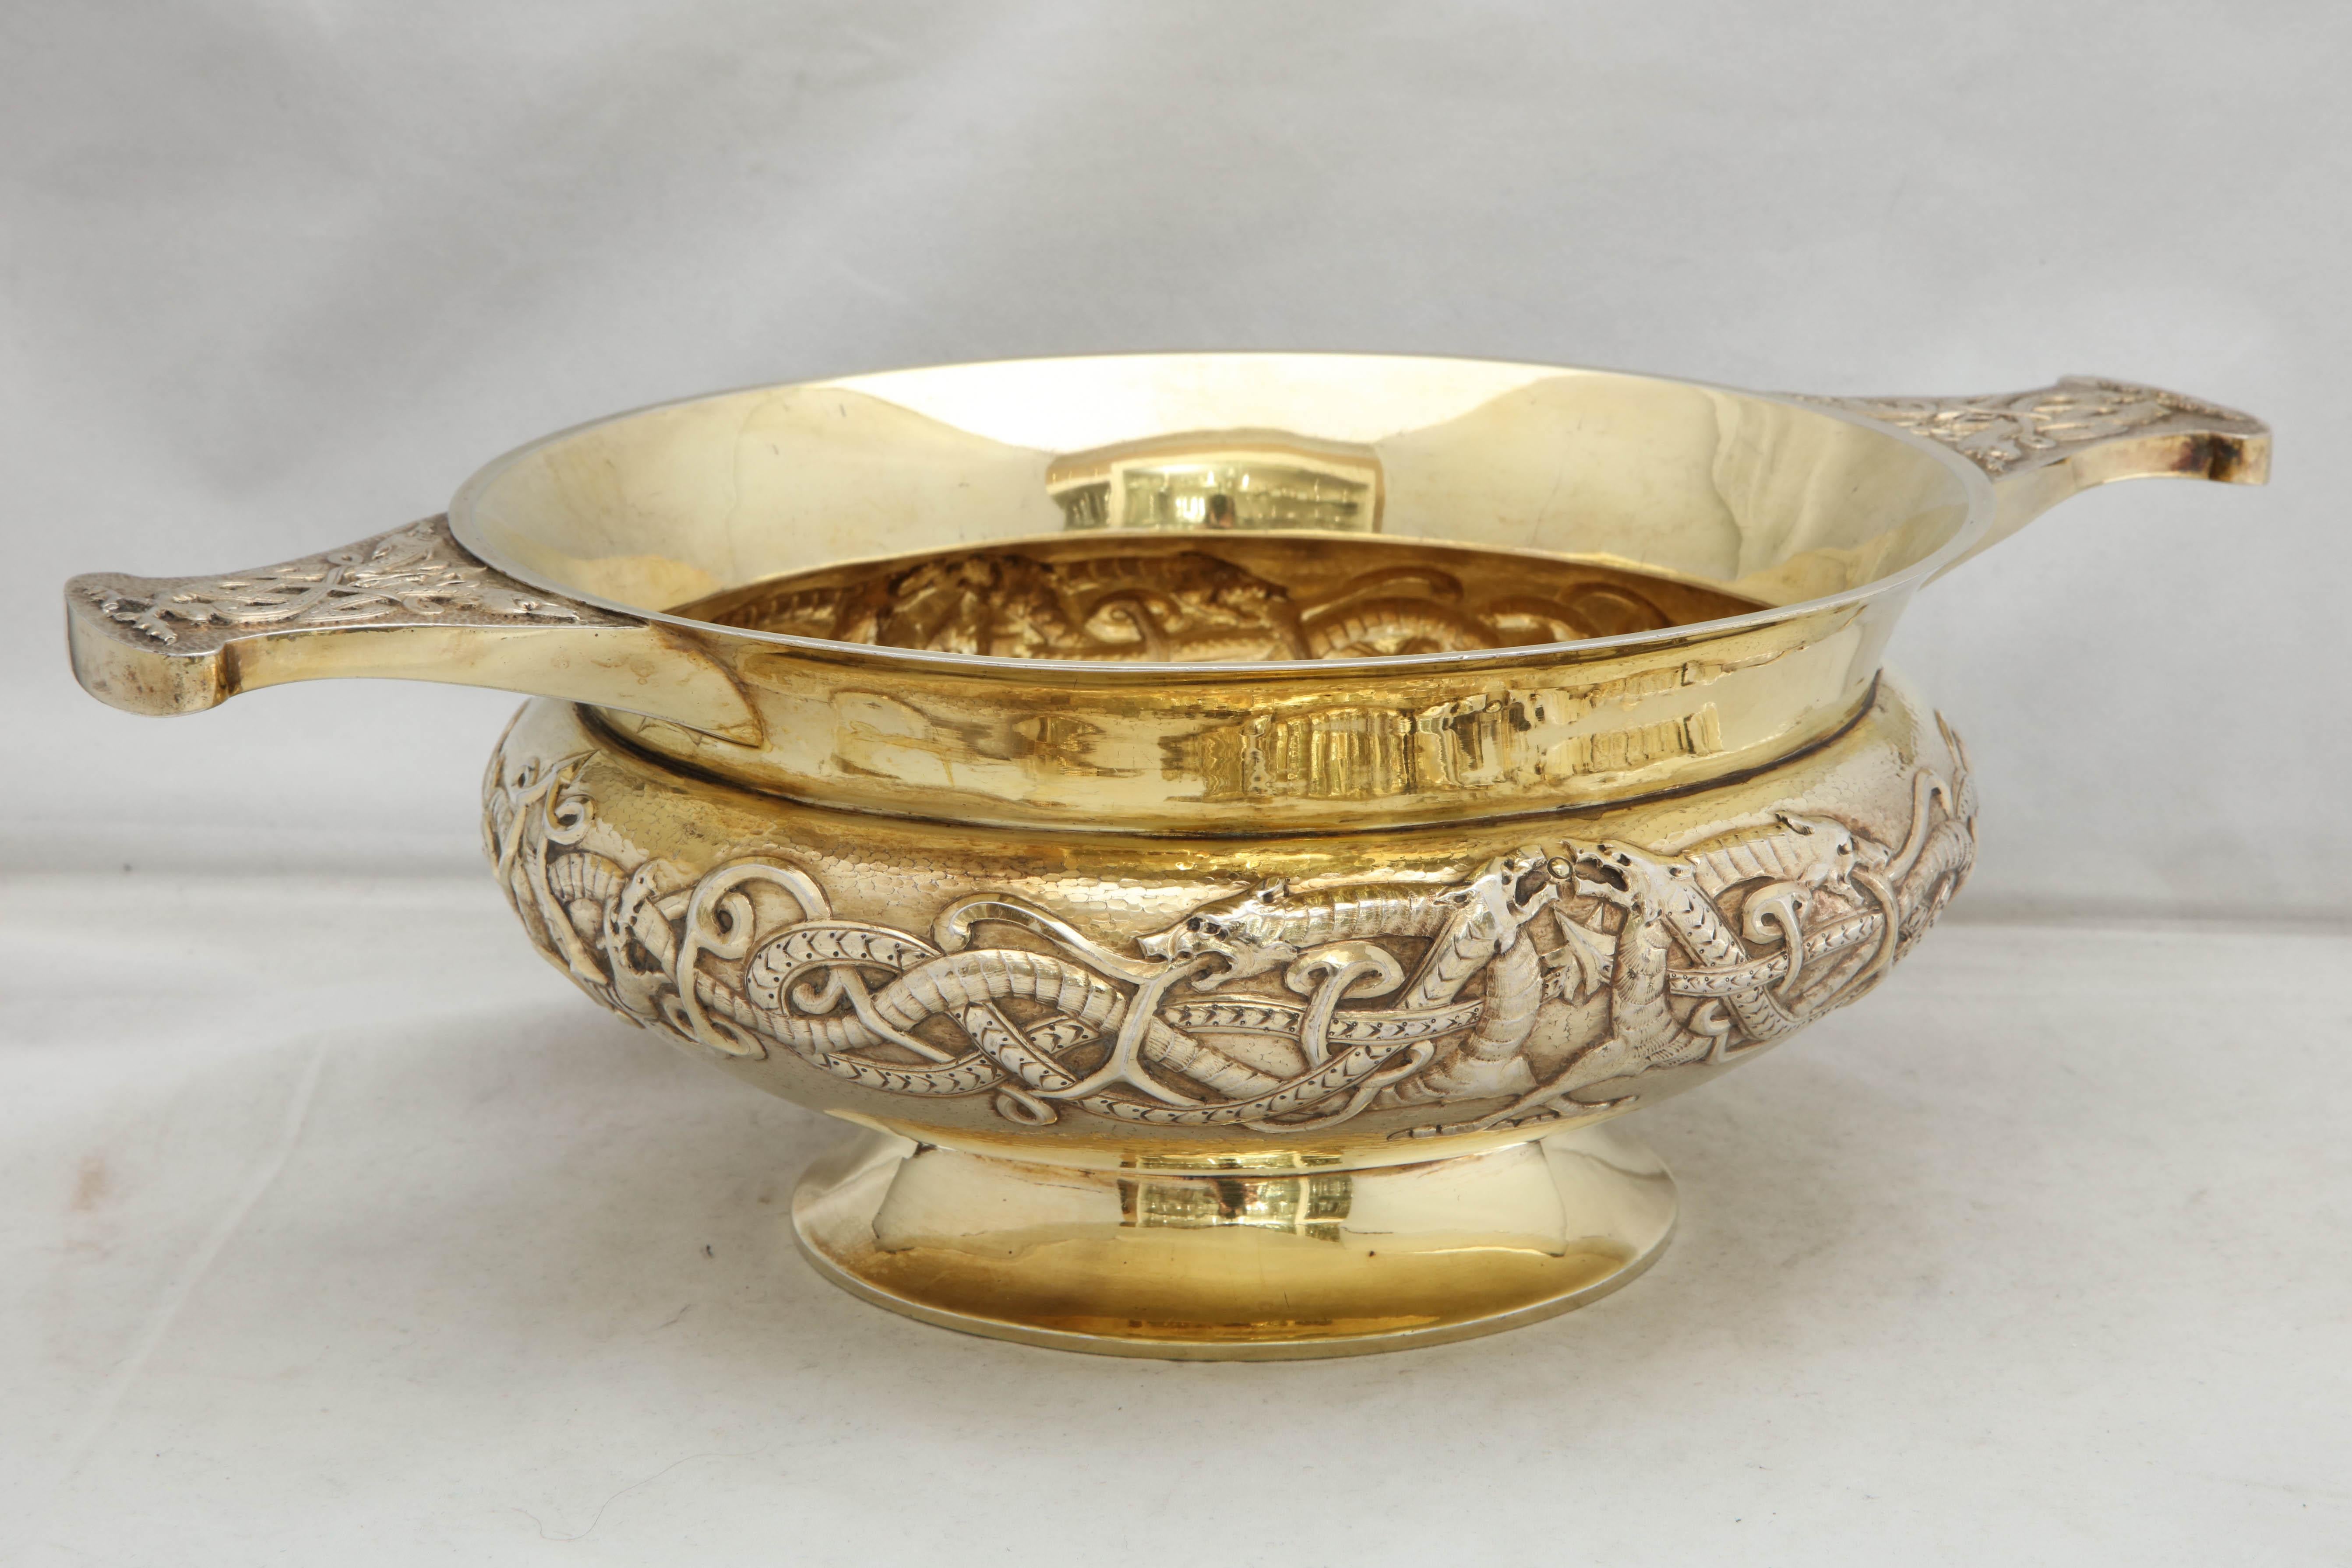 English Edwardian Period Sterling Silver-Gilt Celtic-Style Centerpiece Bowl